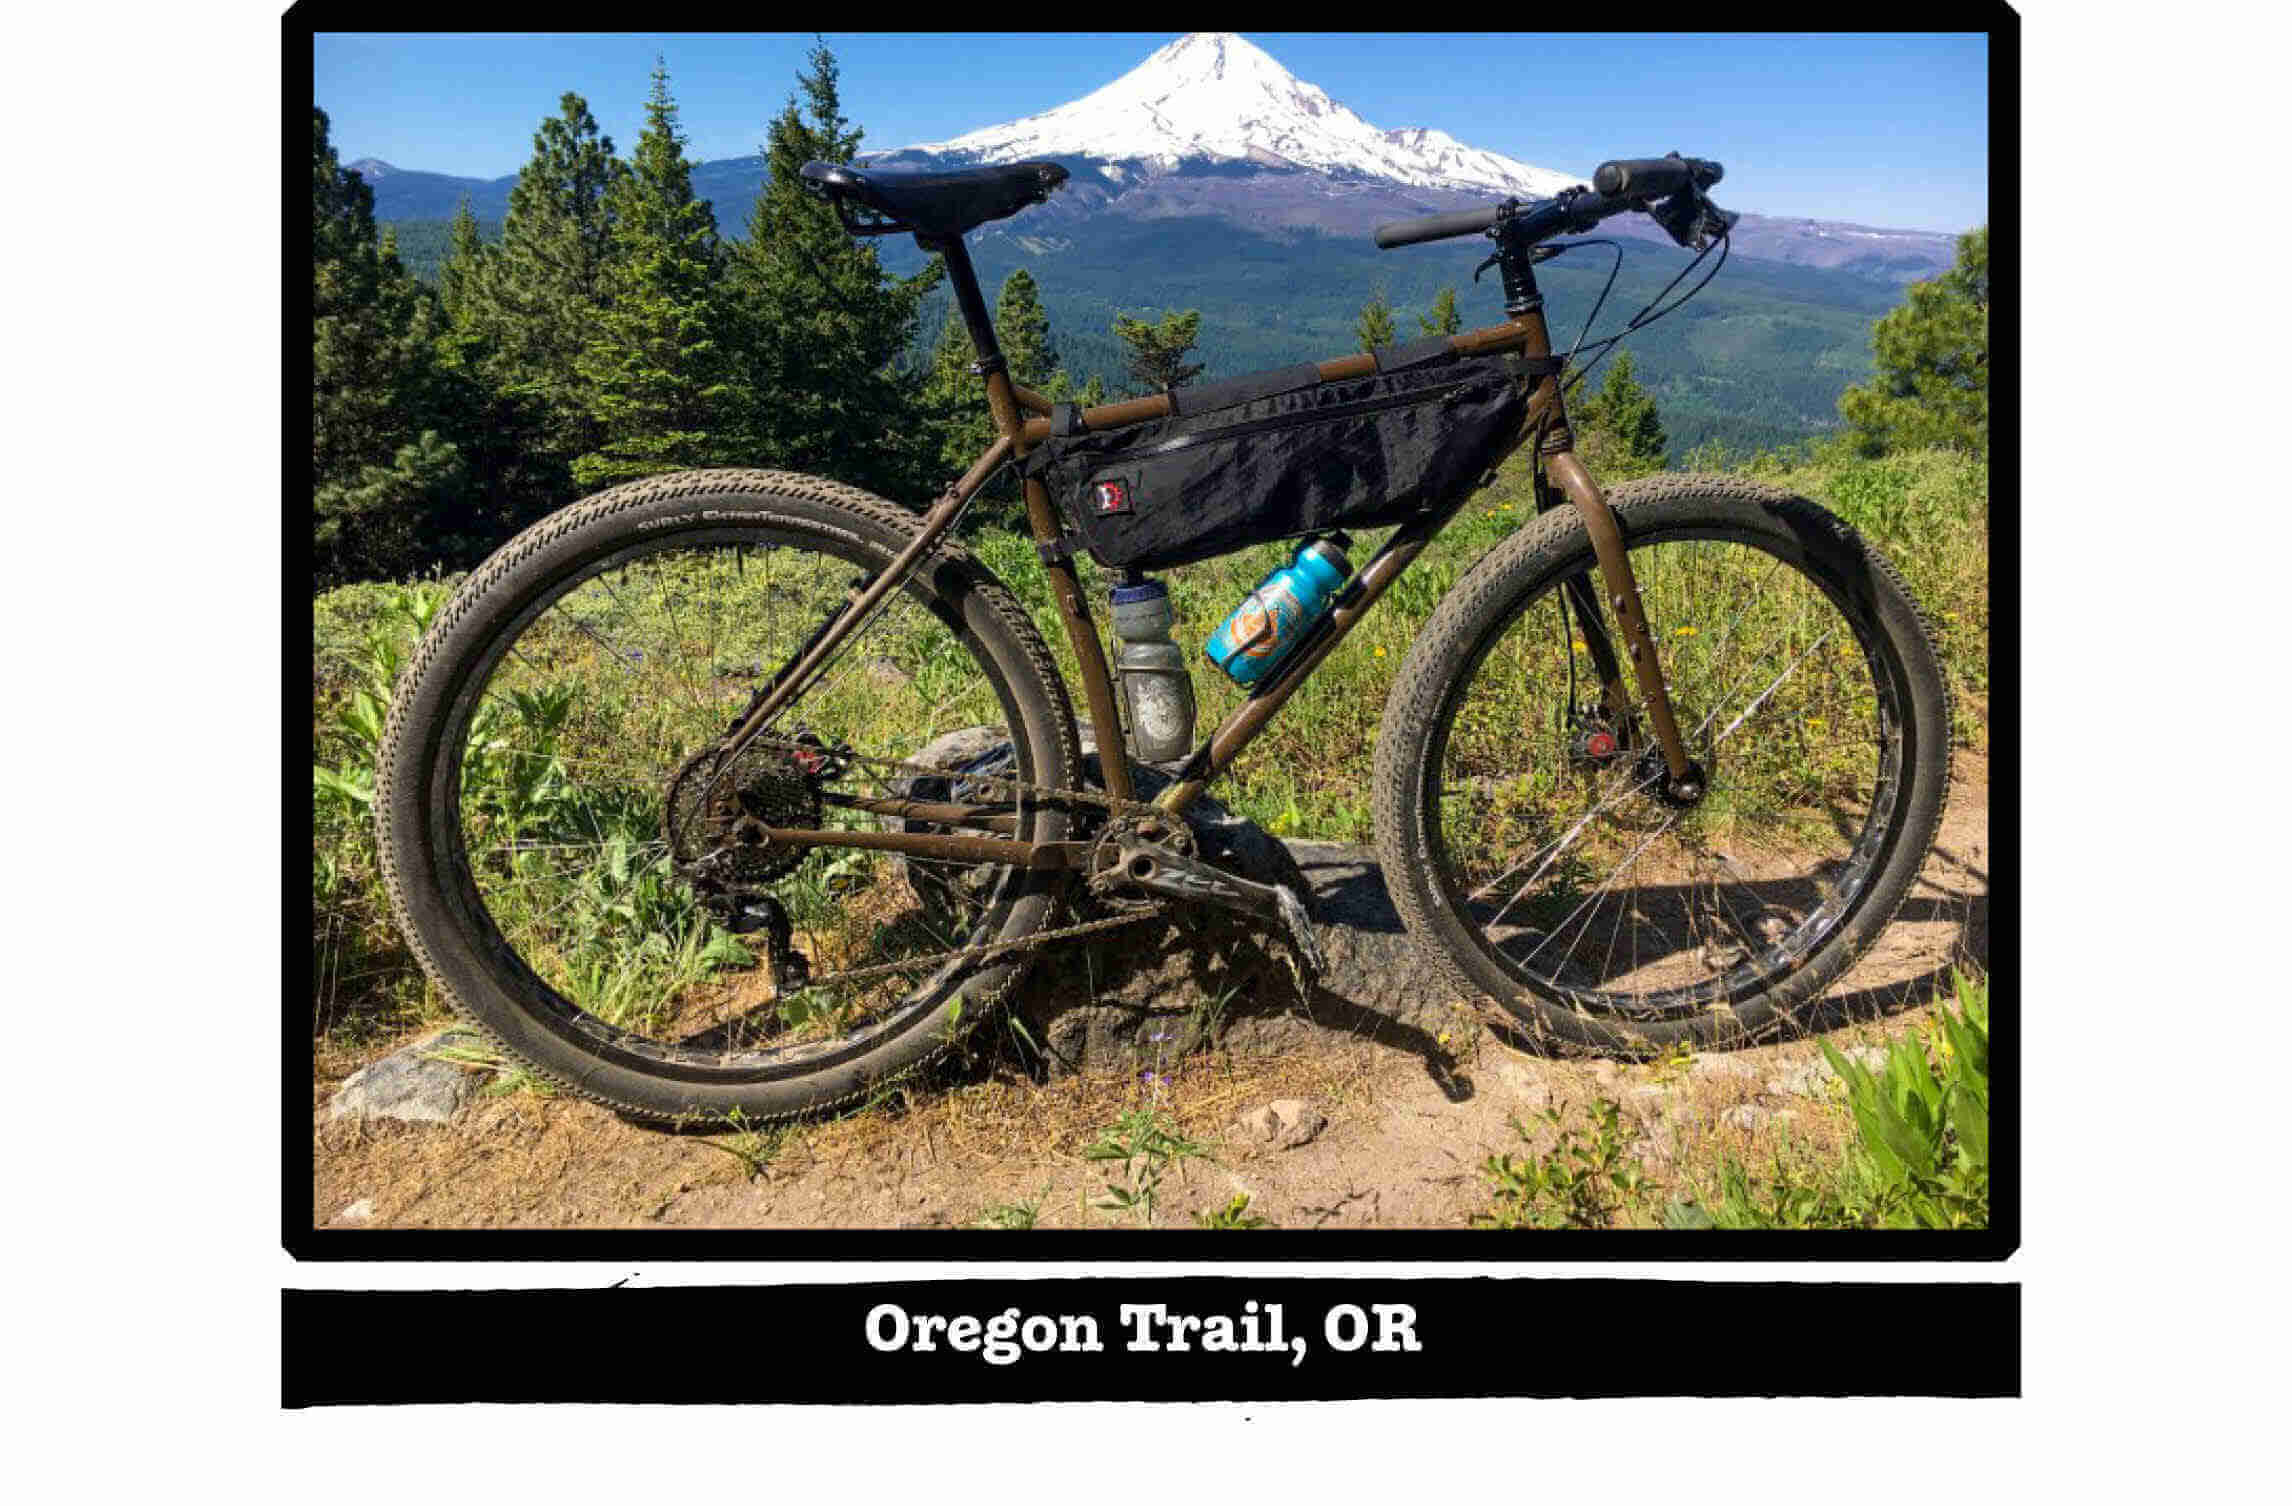 A Surly bike on a grassy hill, with pine trees and snow capped mountain in background - Oregon Trail, OR tag below image